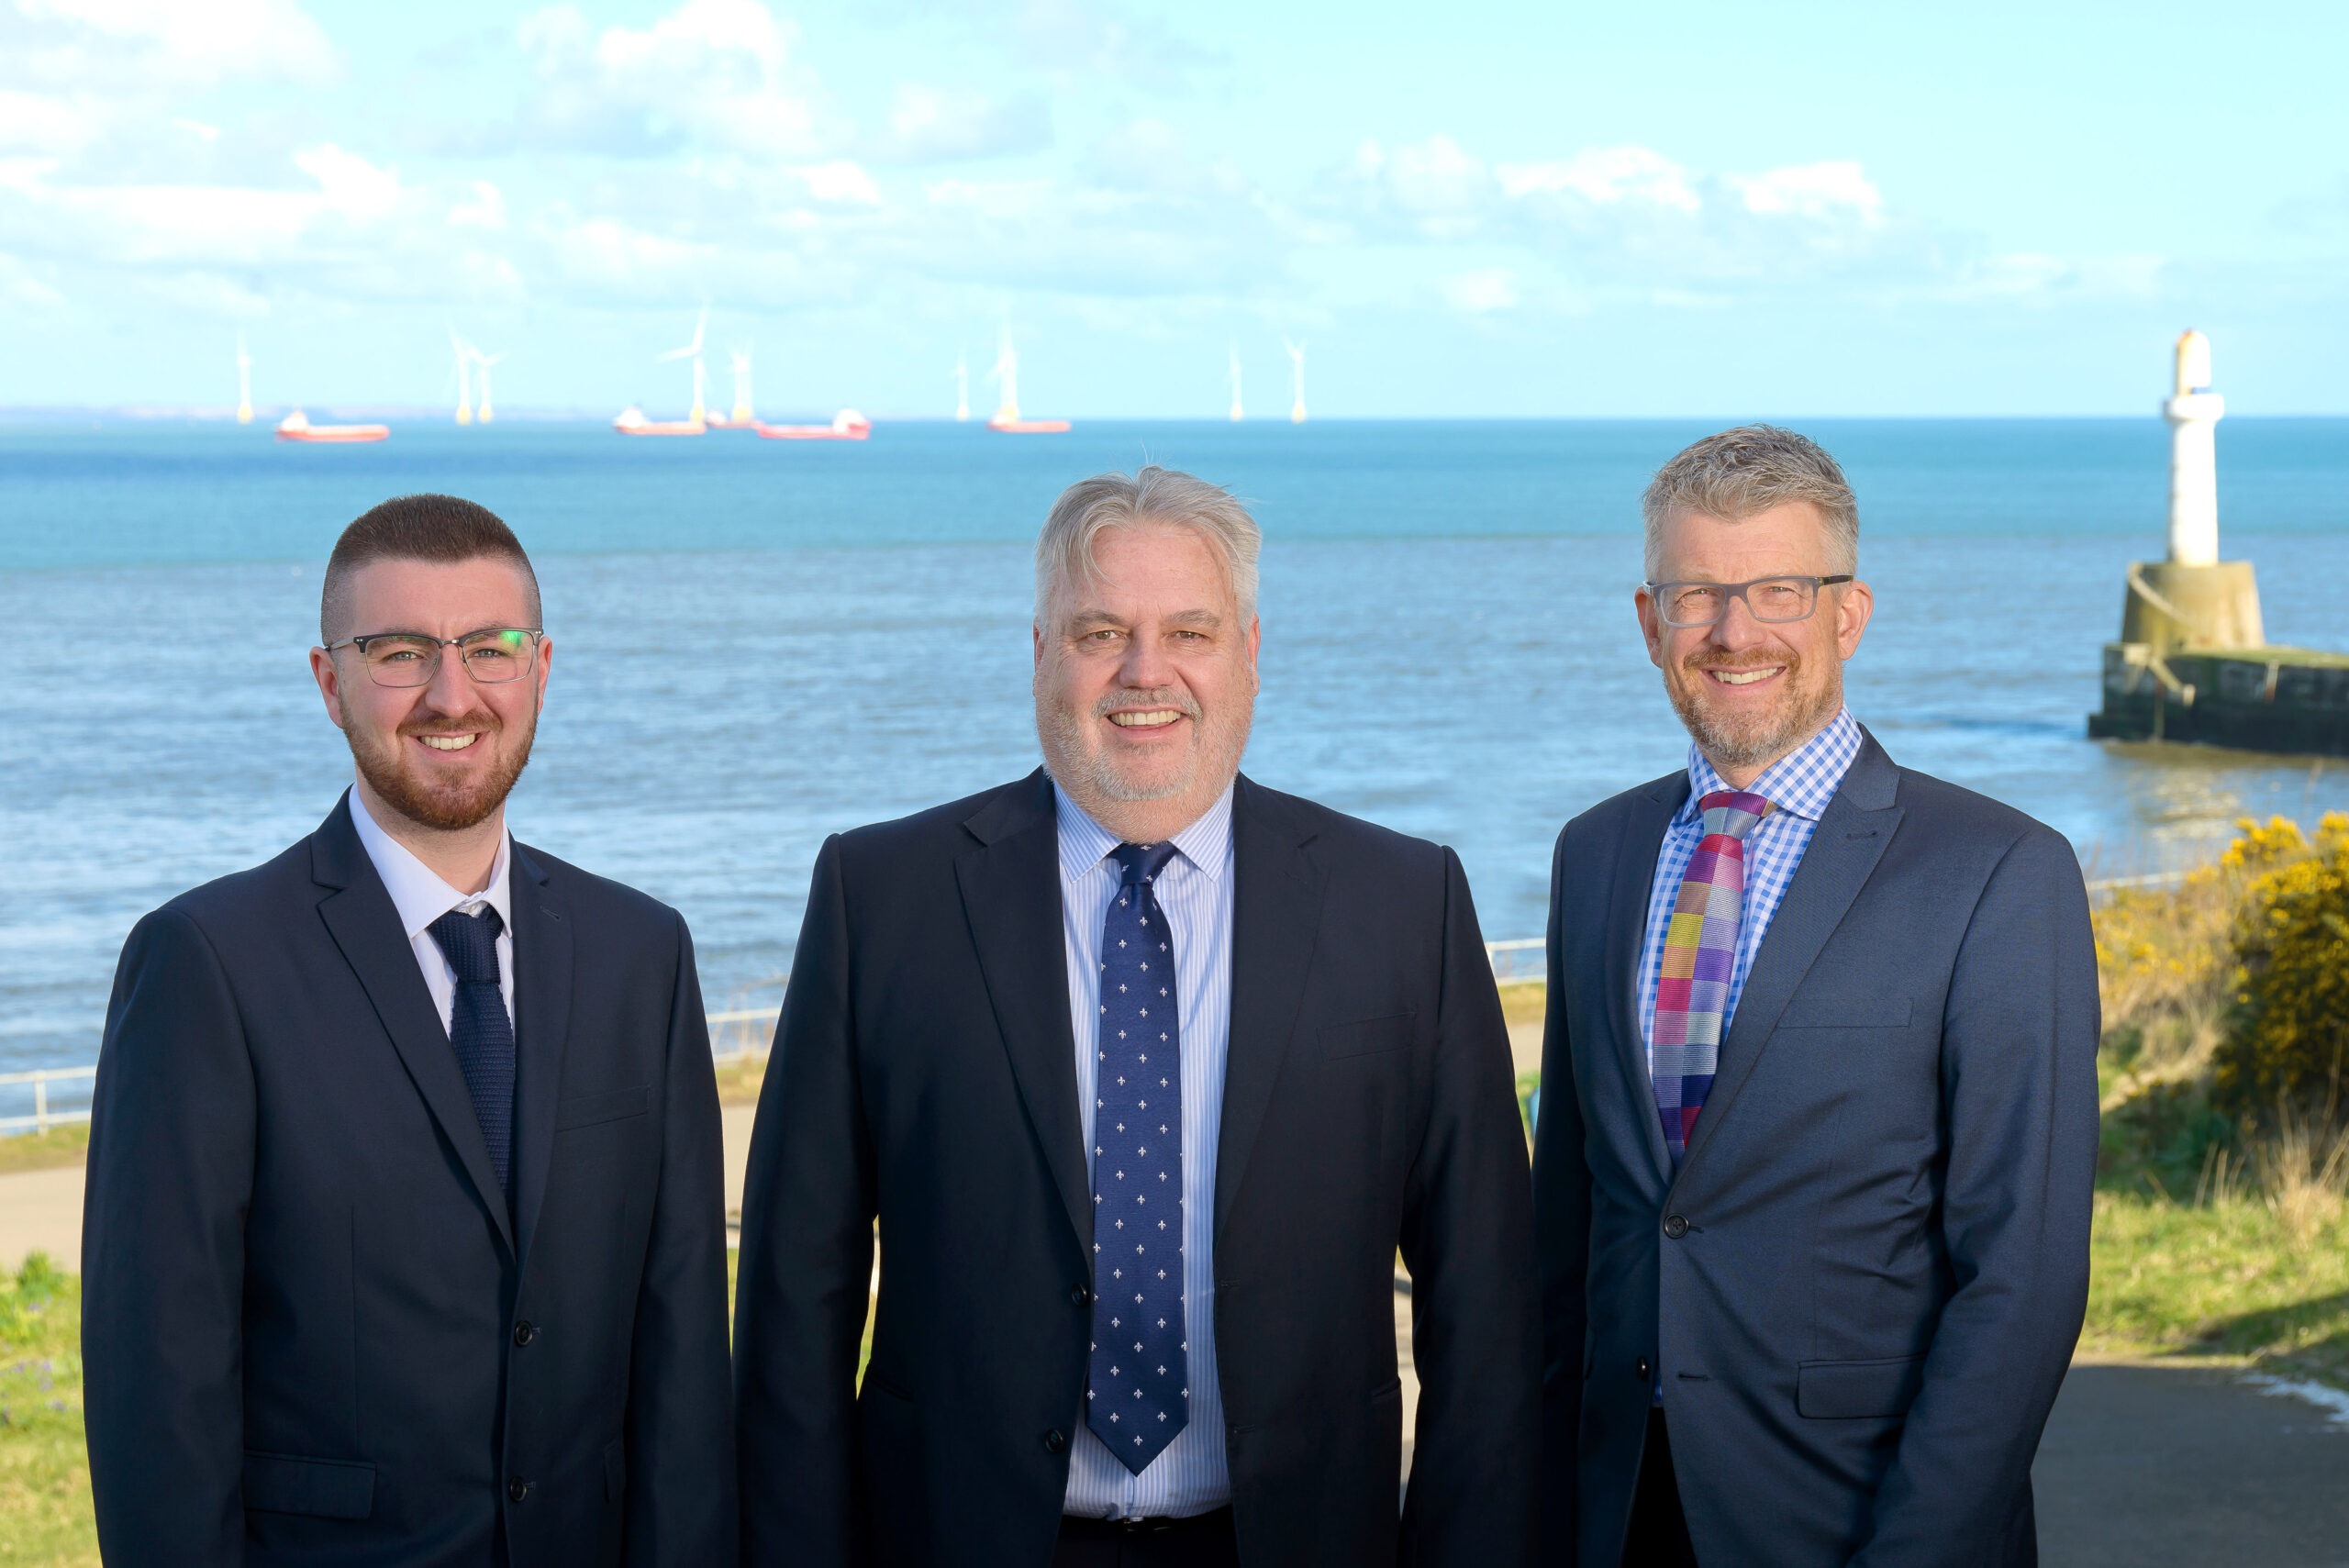 MEMBER NEWS: Peterson Energy Logistics launches new carbon neutral consultancy service